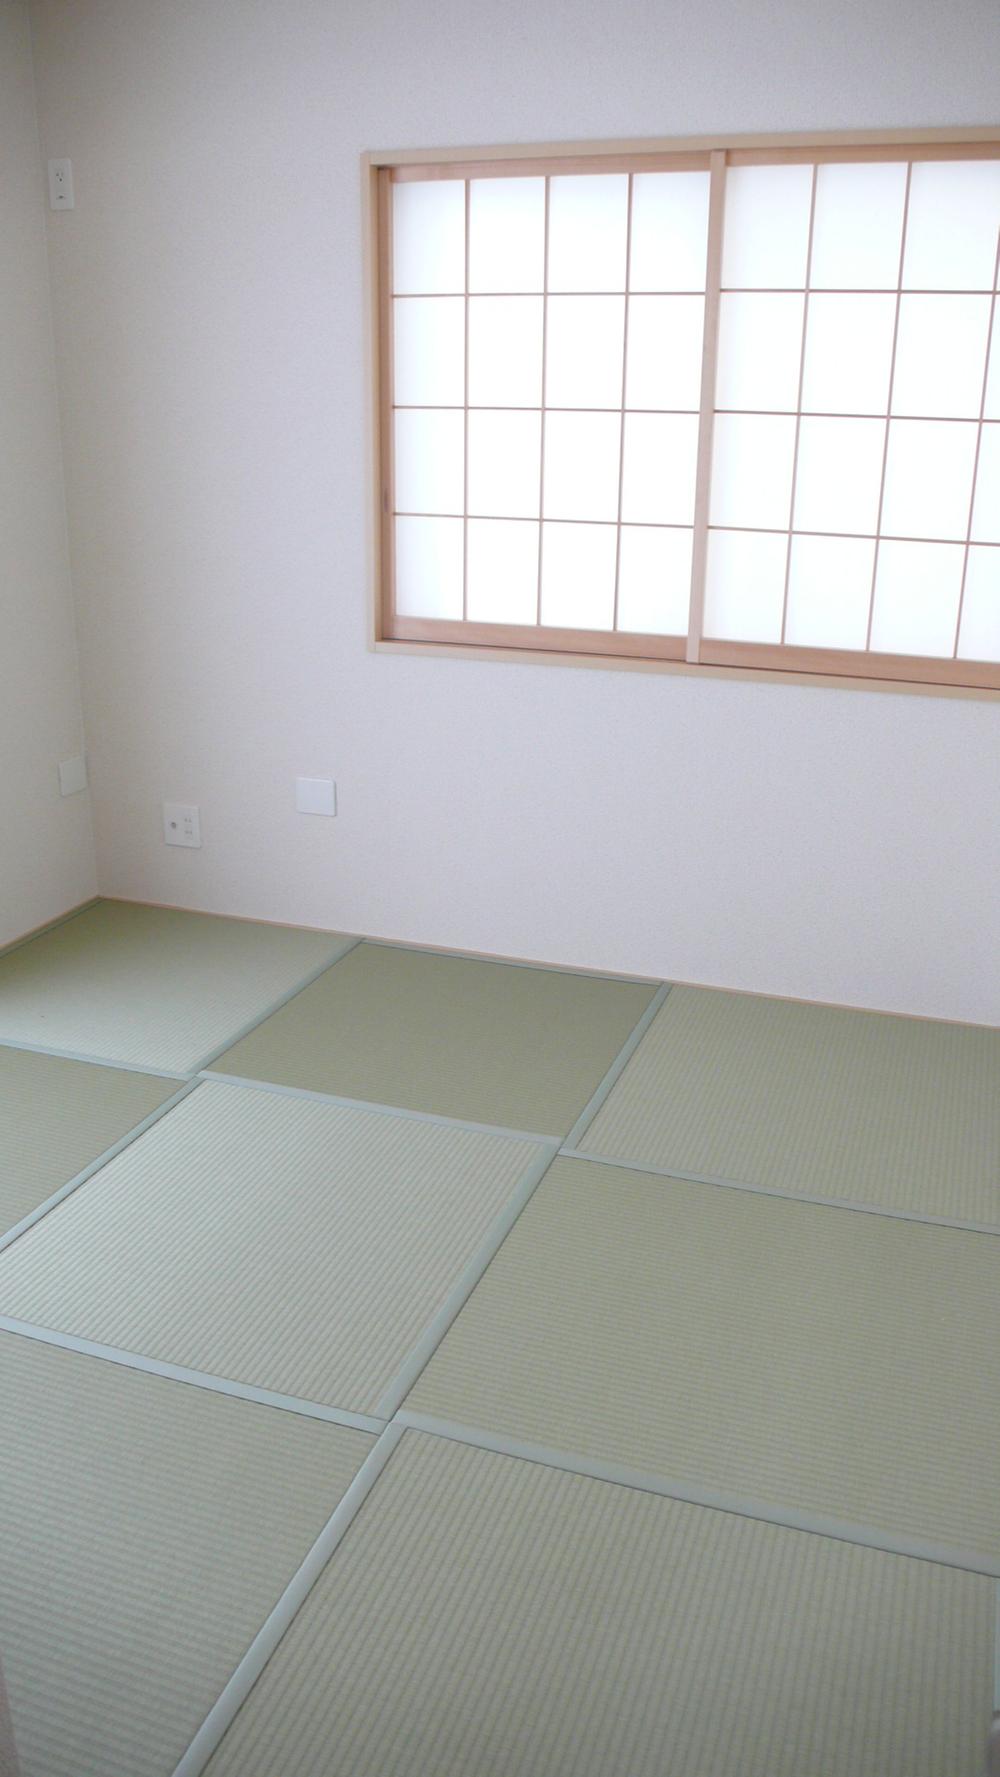 Same specifications photos (Other introspection). Tatami space (closet)